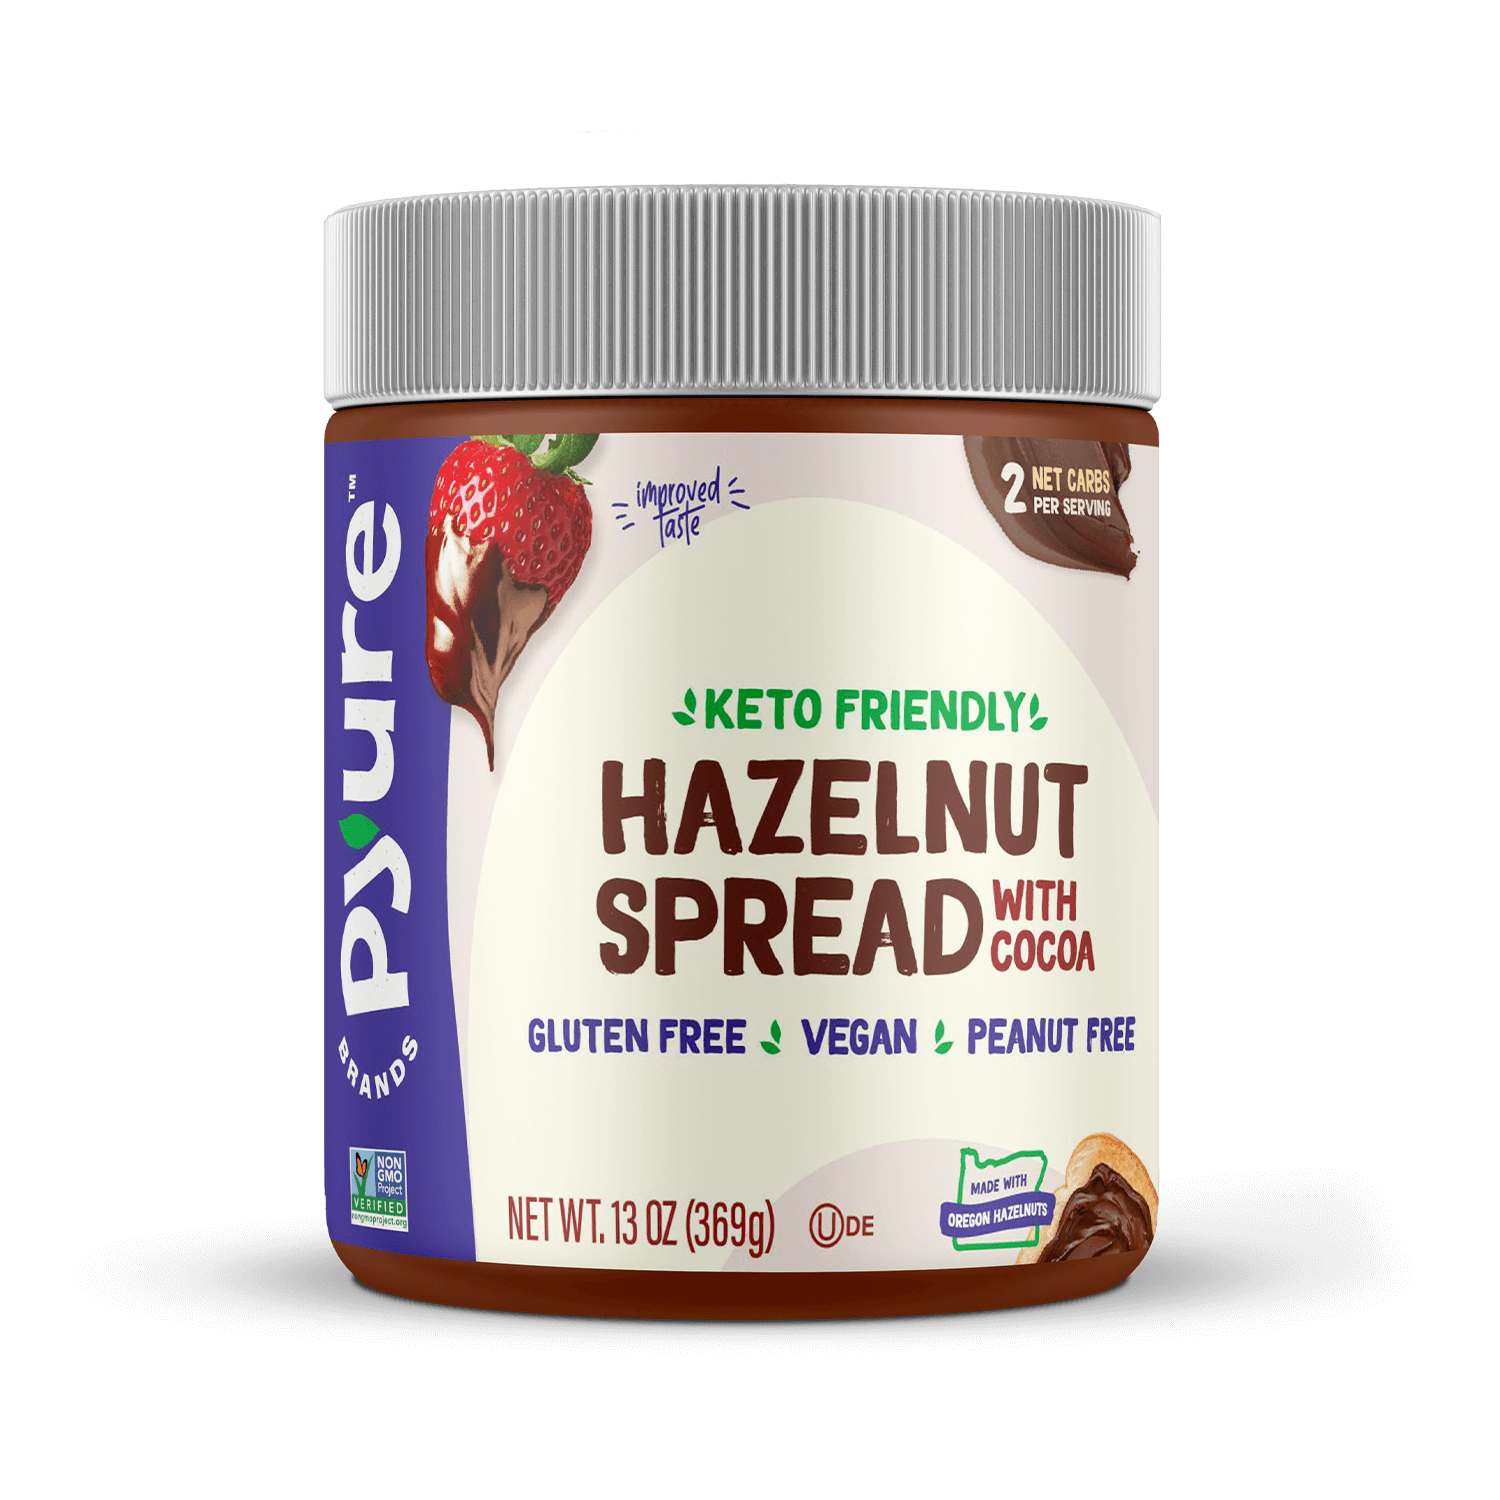 Packaging of Pyure Organic Keto and Sugar-Free Hazelnut Spread with Cocoa. Peanut and gluten free. Vegan. 